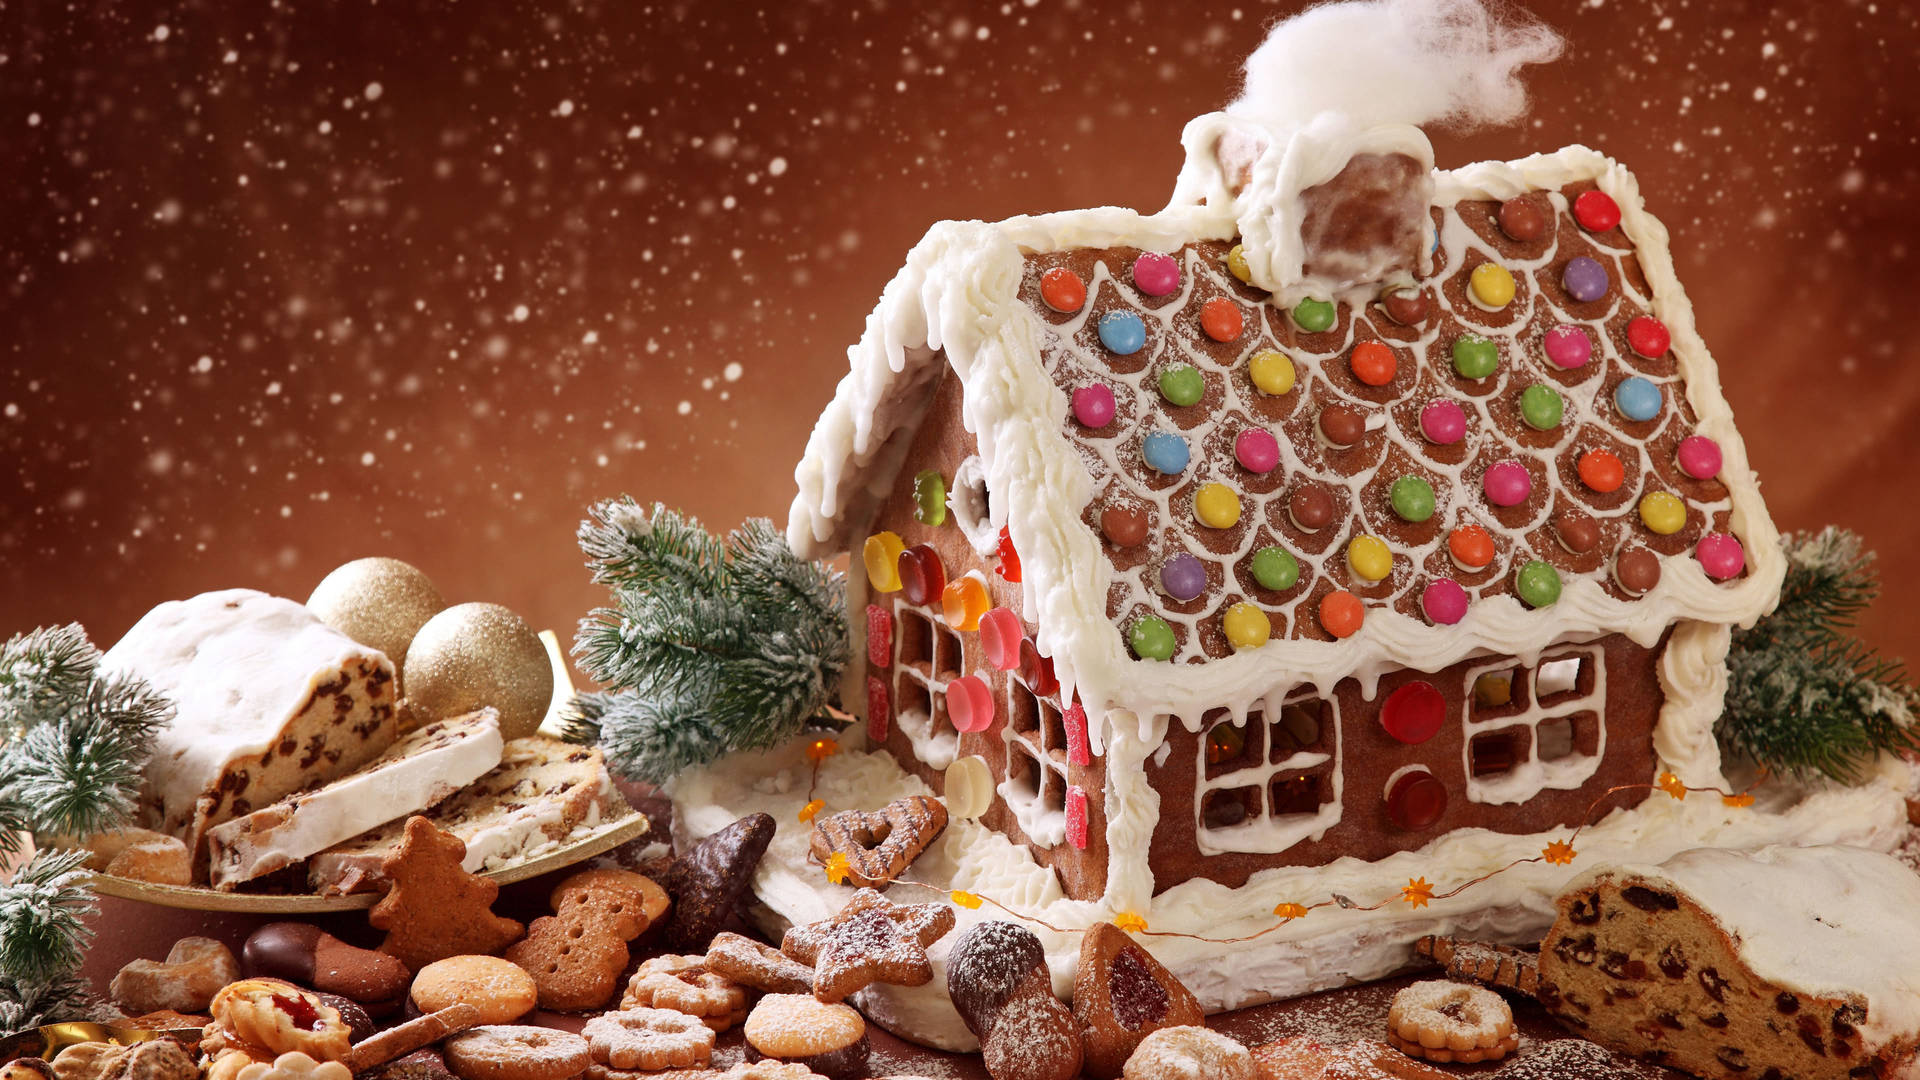 Delectable Gingerbread Chocolate House Background